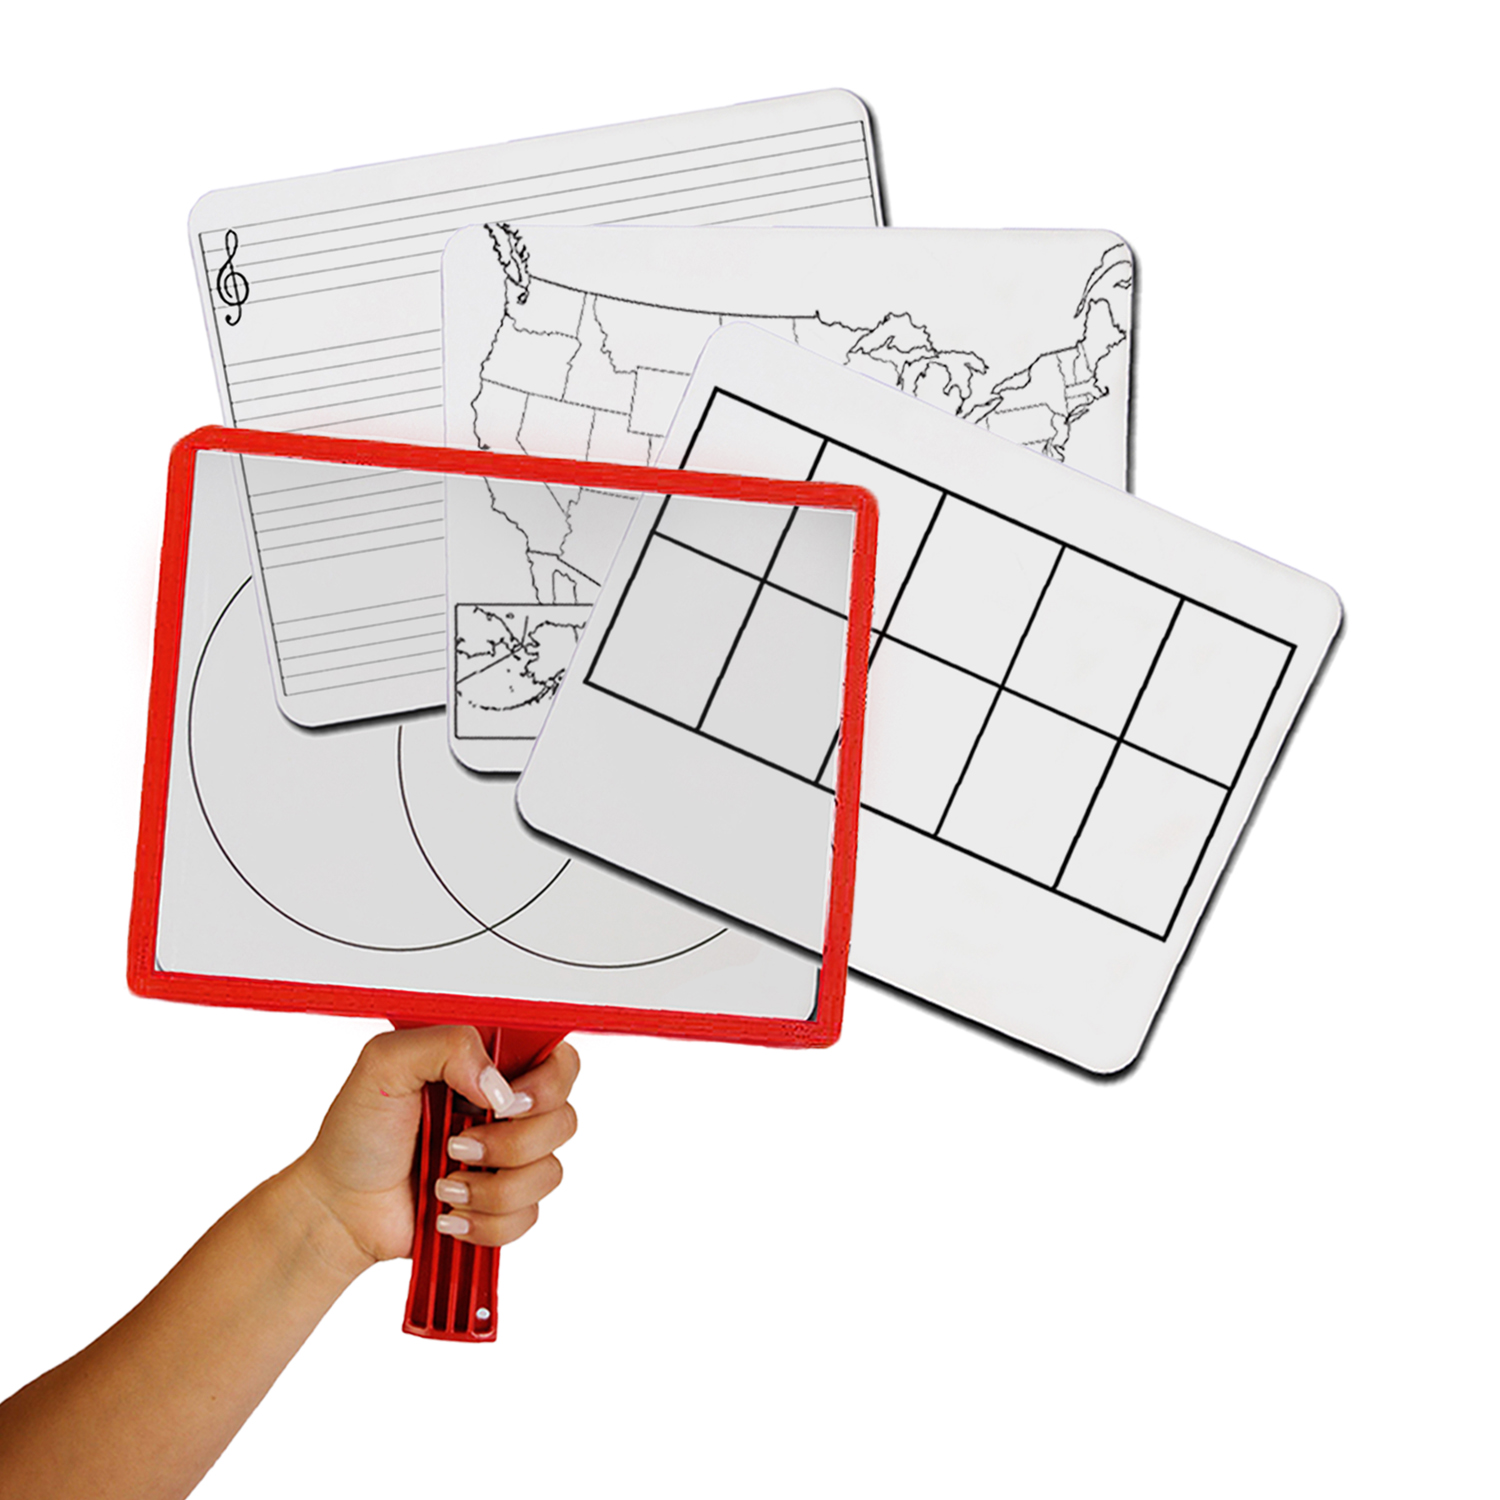 Customizable Handheld Whiteboards with Clear Dry Erase Sleeves & Markers, Class Set of 12